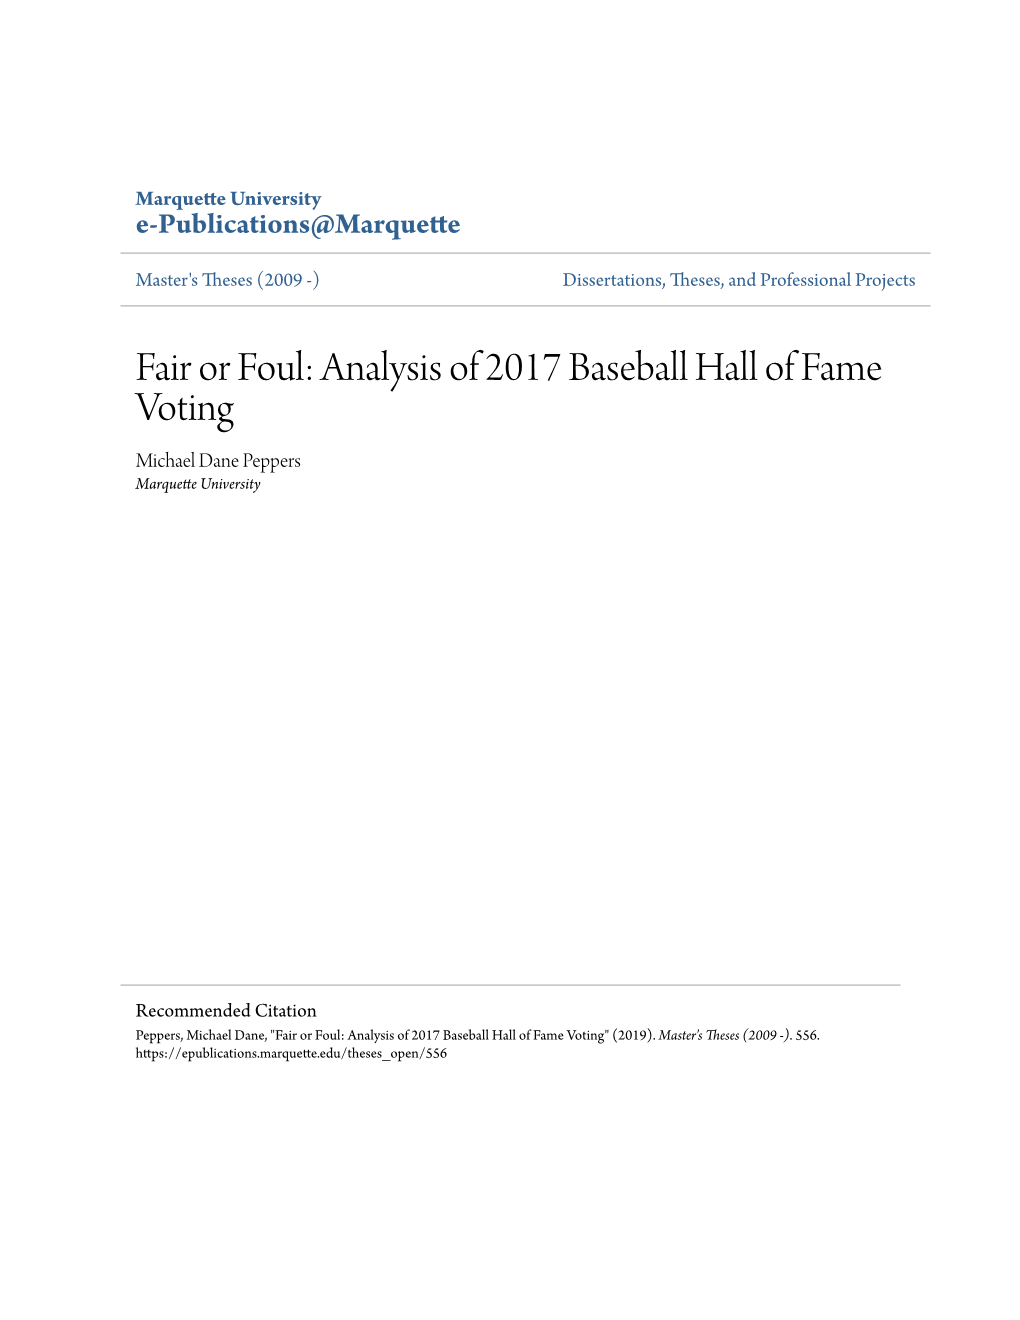 Fair Or Foul: Analysis of 2017 Baseball Hall of Fame Voting Michael Dane Peppers Marquette University